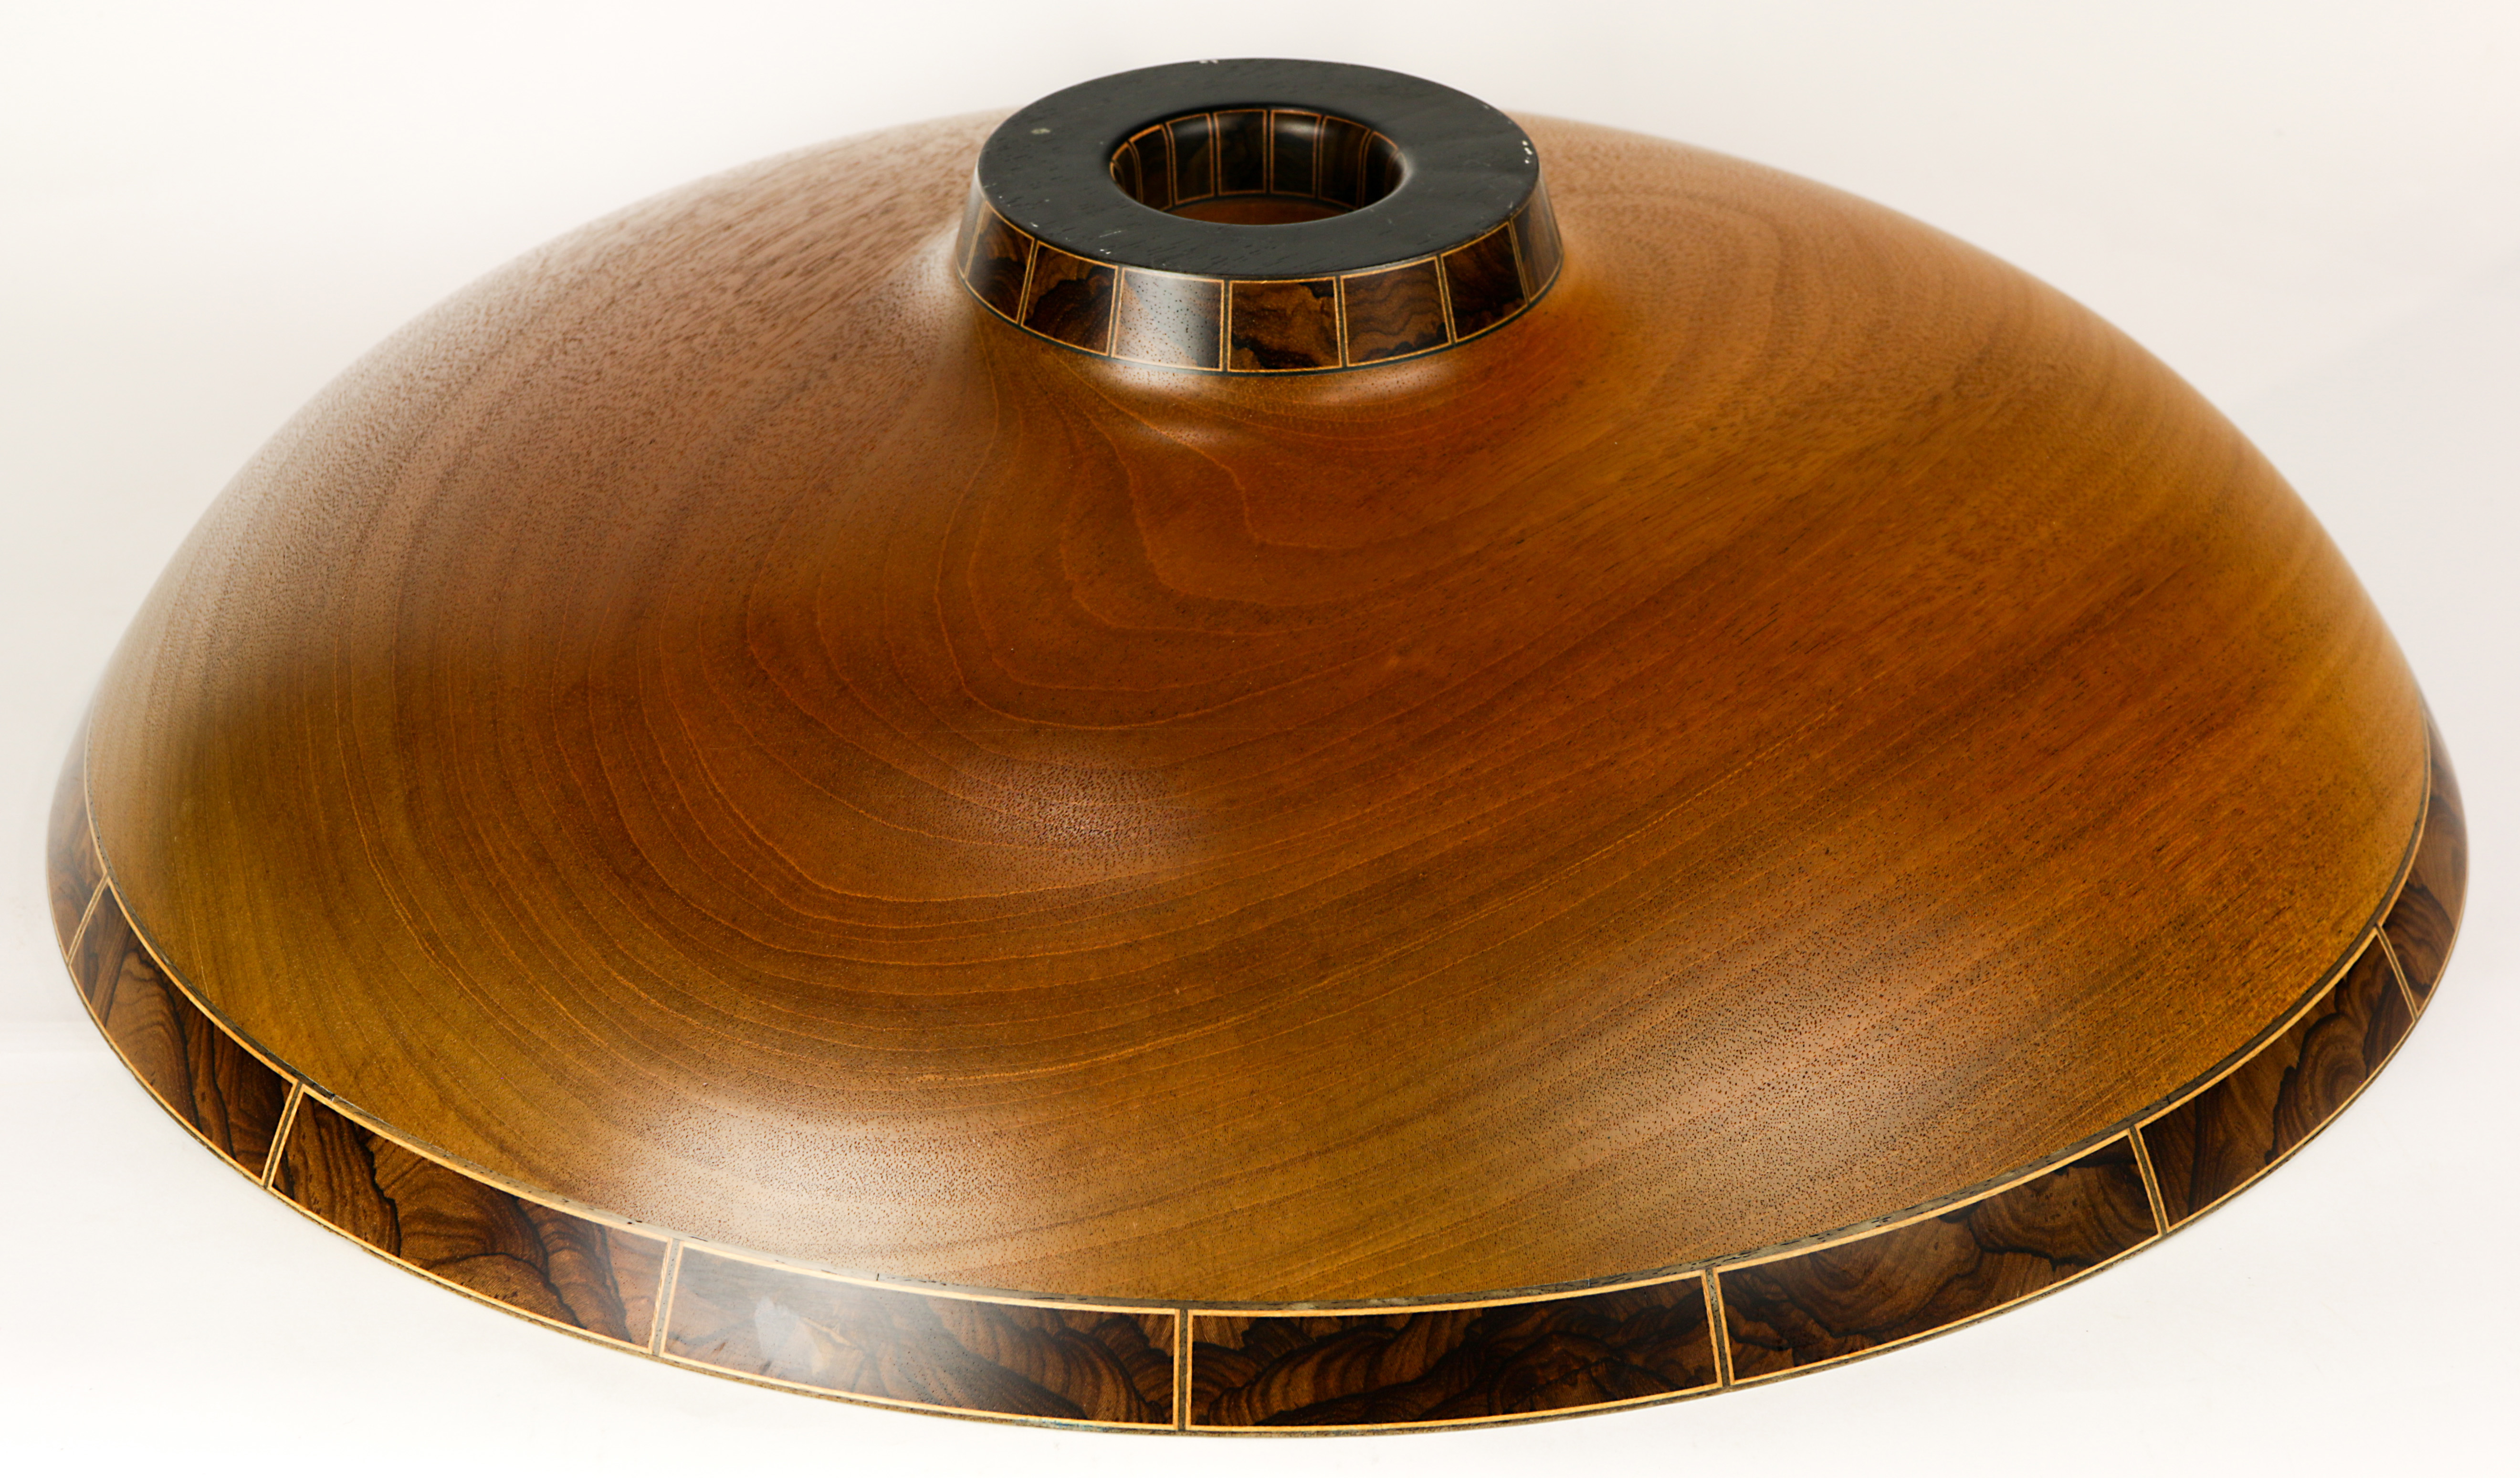 A Barry Macdonald wood turned center bowl - Image 2 of 2